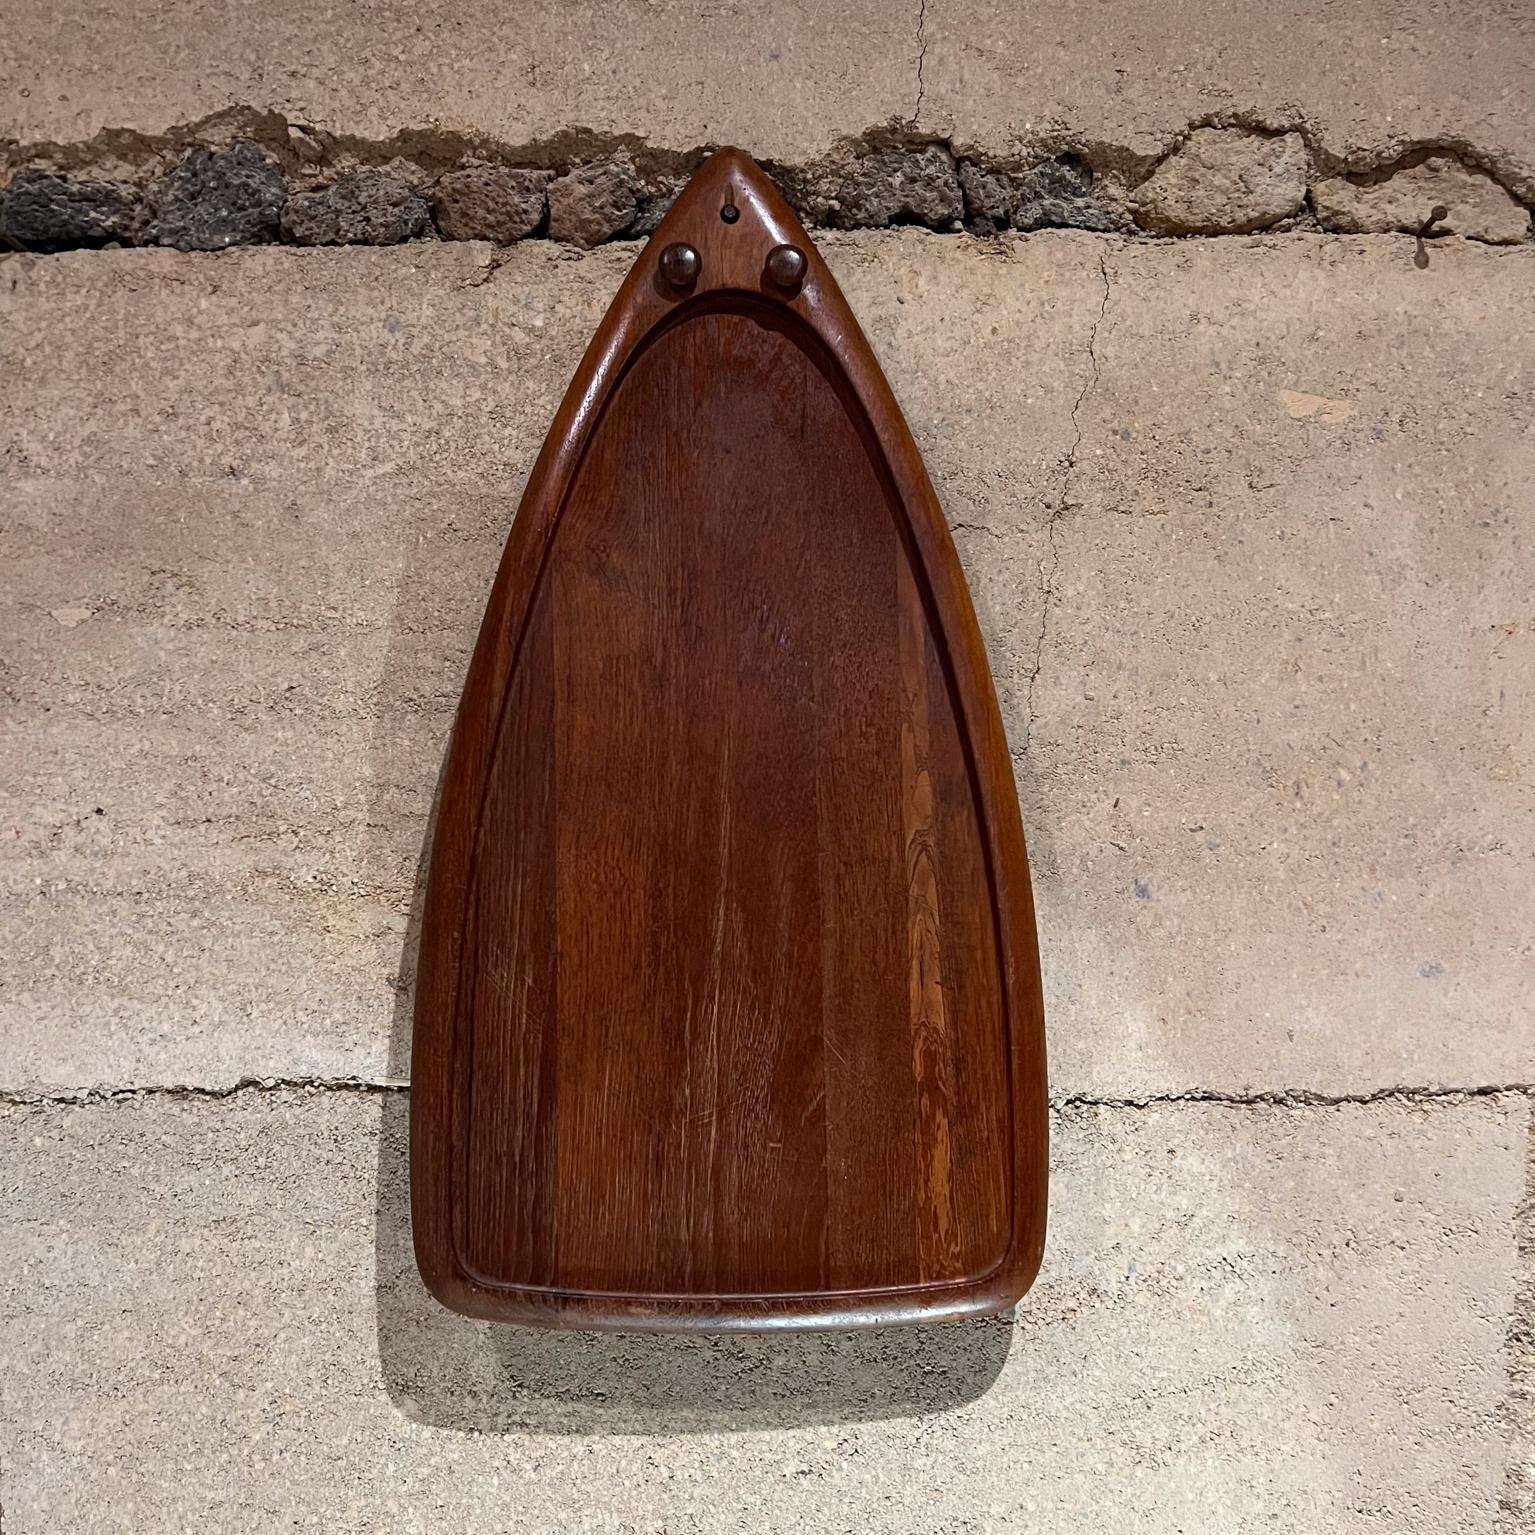 
Digsmed Denmark Teak Wood Tray Triangular
Hangable Cutting Board Surfboard Charcuterie
Signed
12.75 w x 24.5 long x 1d
Original vintage unrestored, refer to images listed.